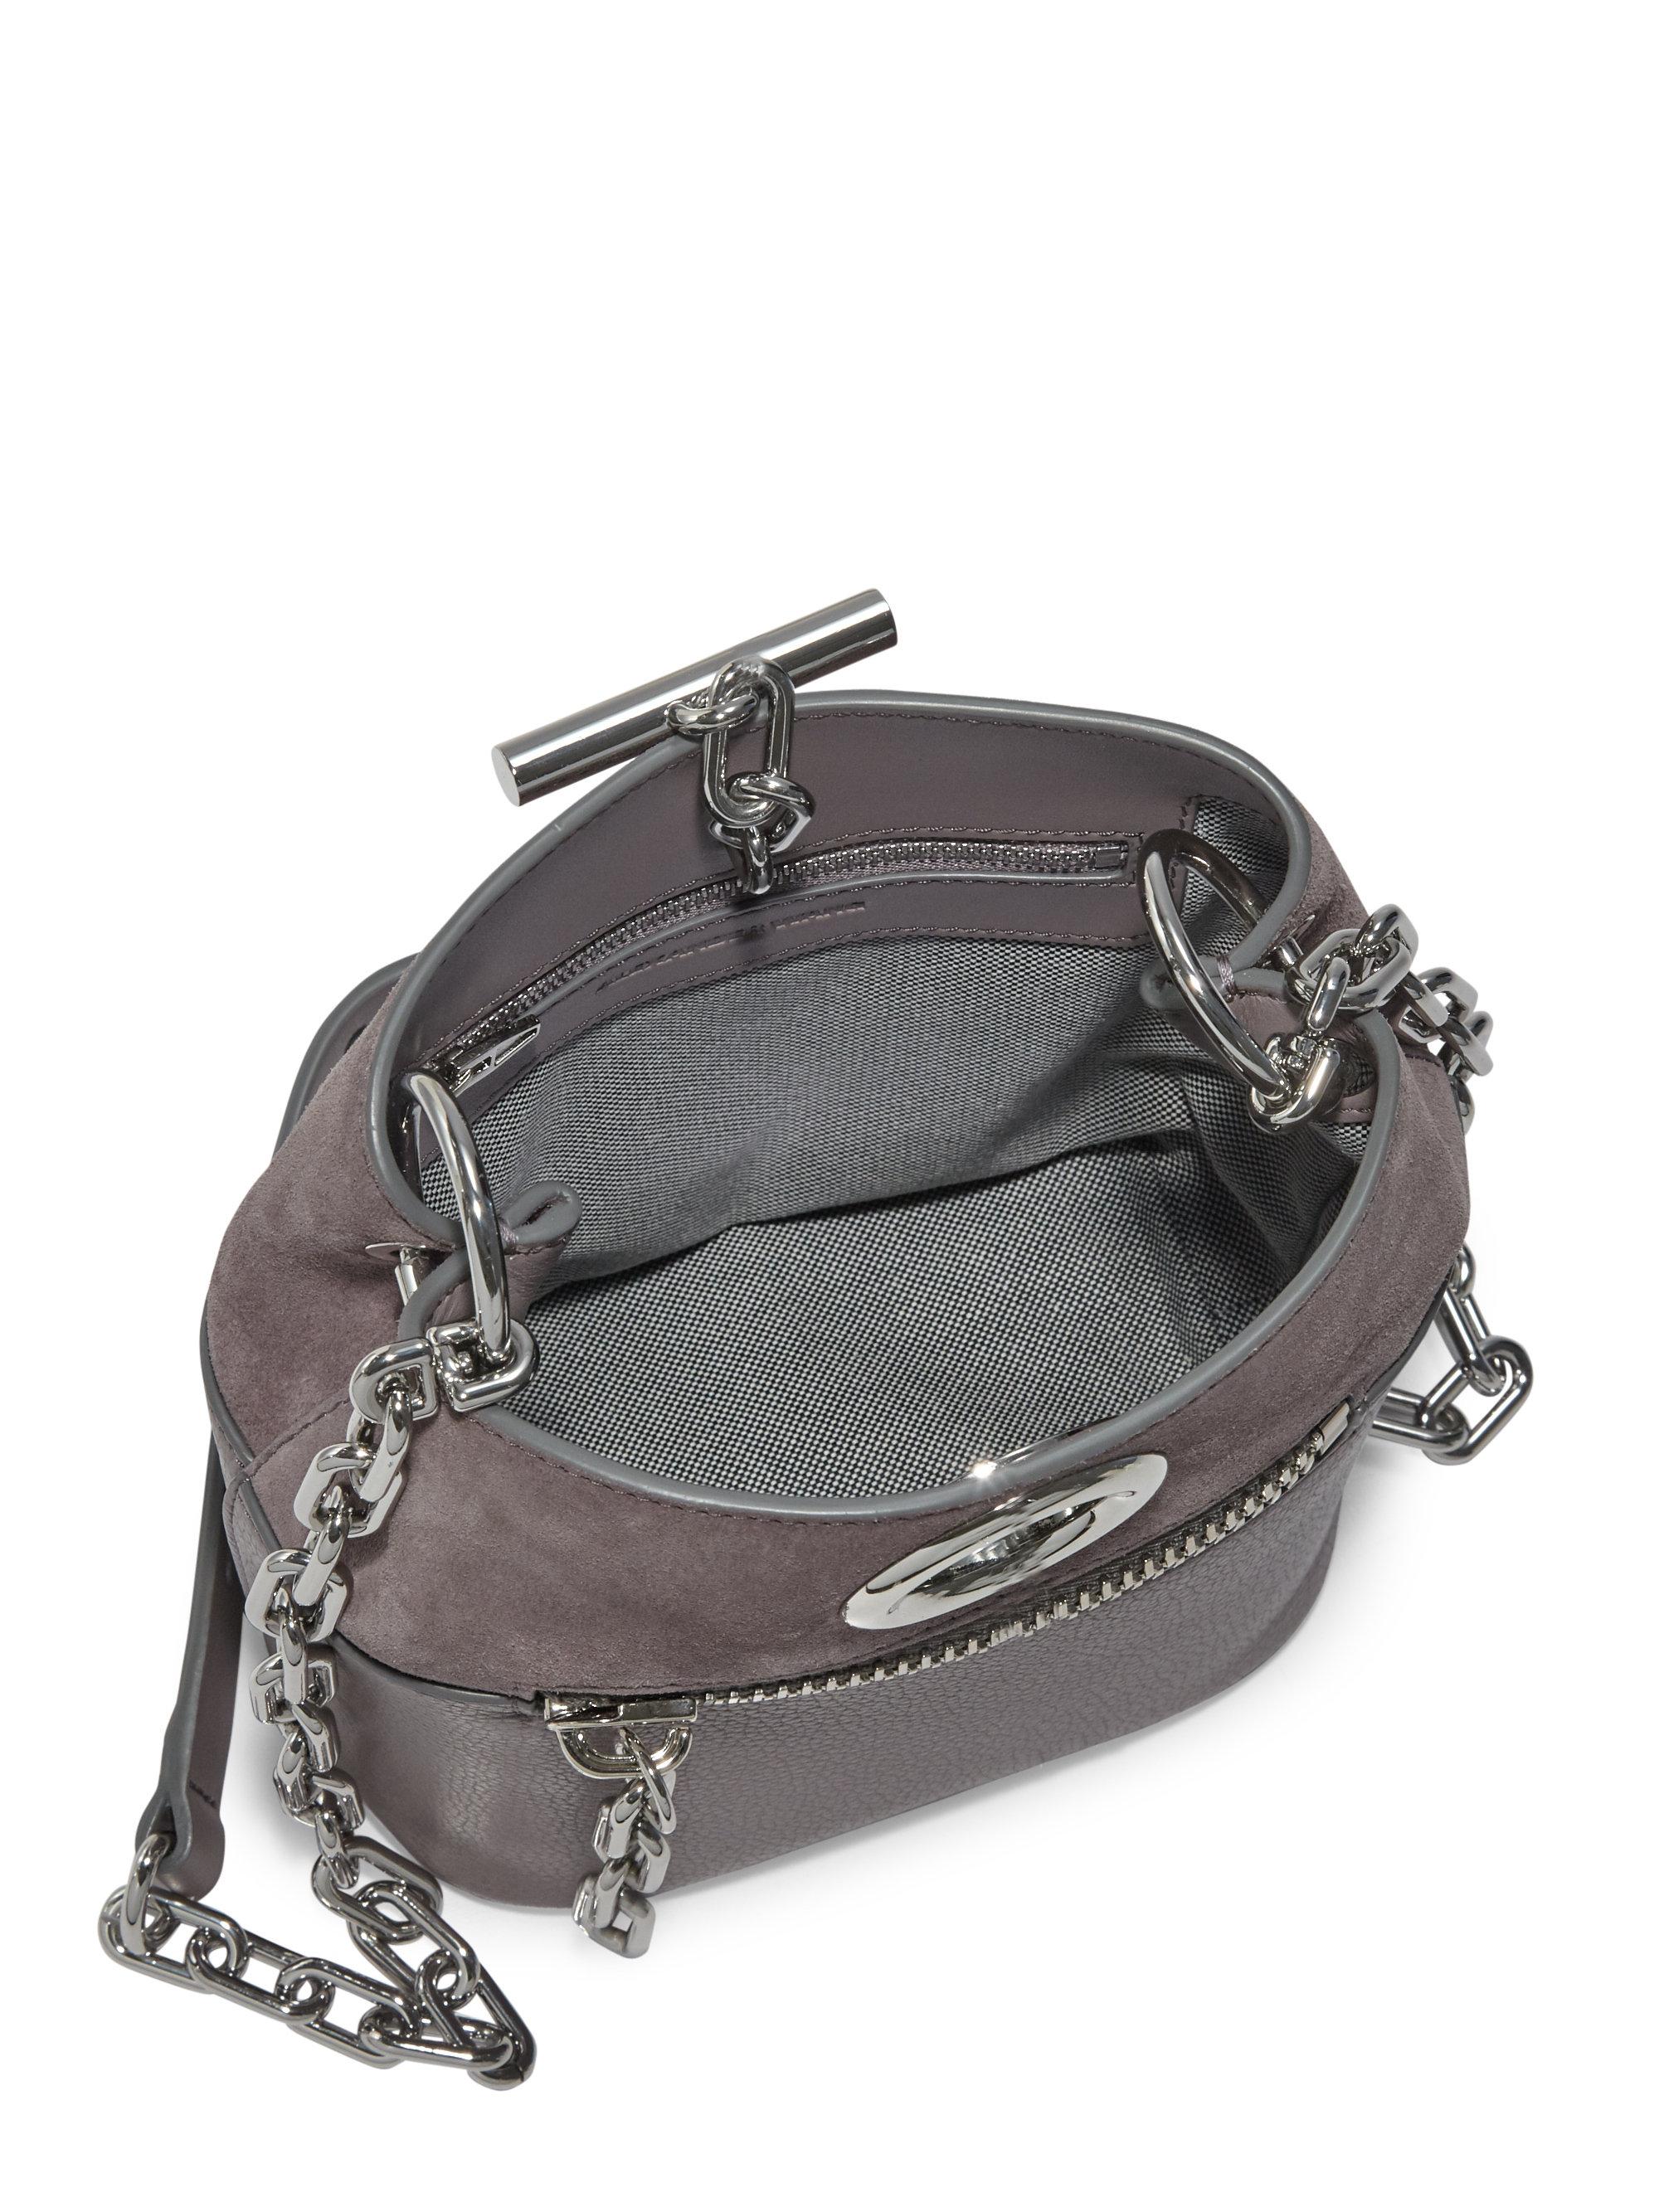 Alexander Wang Riot Leather & Suede Bucket Bag in Grey (Gray) - Lyst